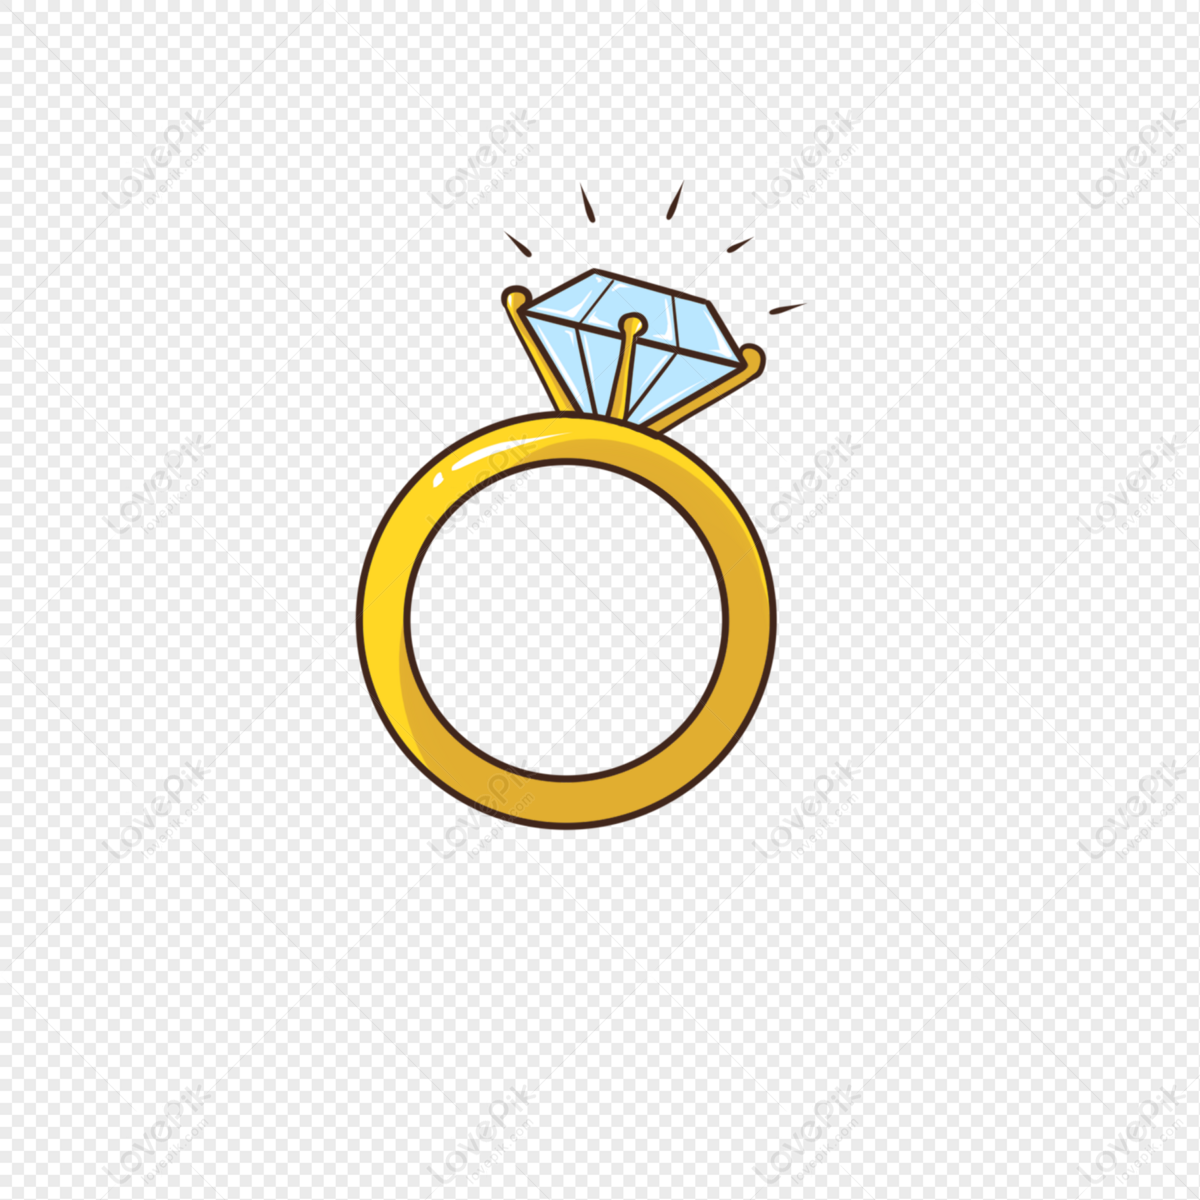 Ring PNG Transparent Background And Clipart Image For Free Download -  Lovepik | 401175010